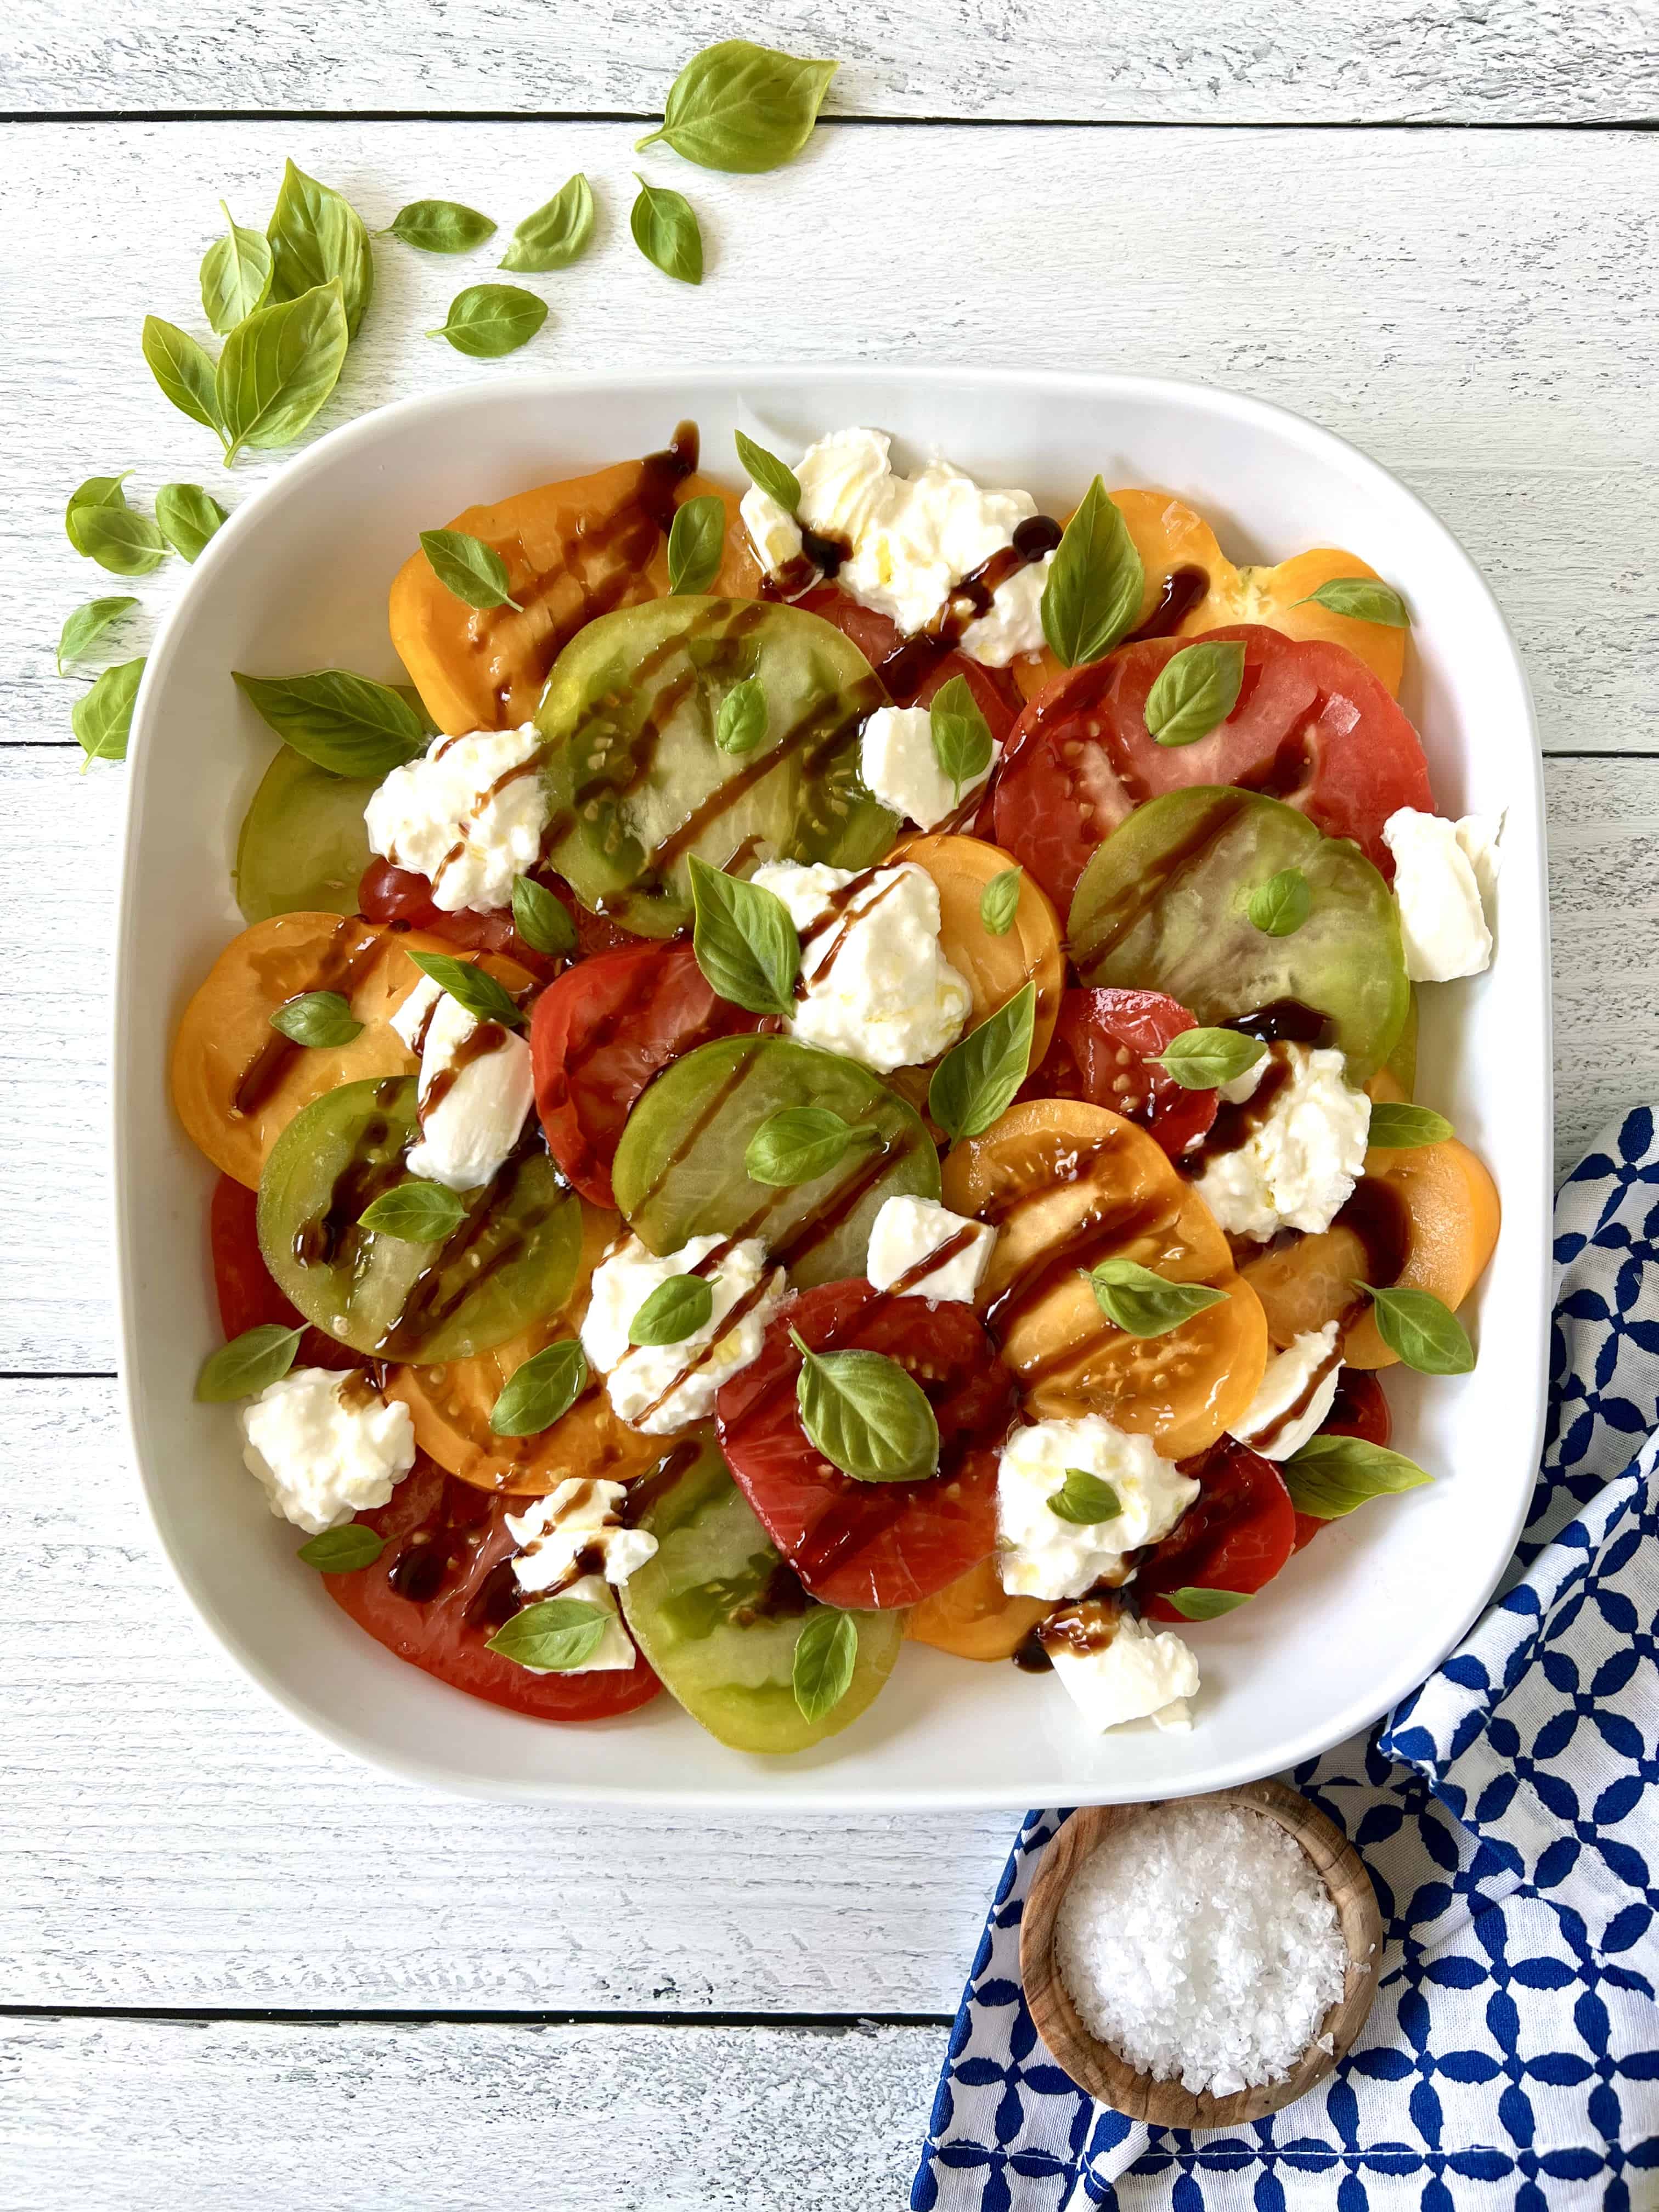 An Italian caprese salad with burrata cheese and fresh basil leaves in a white platter.